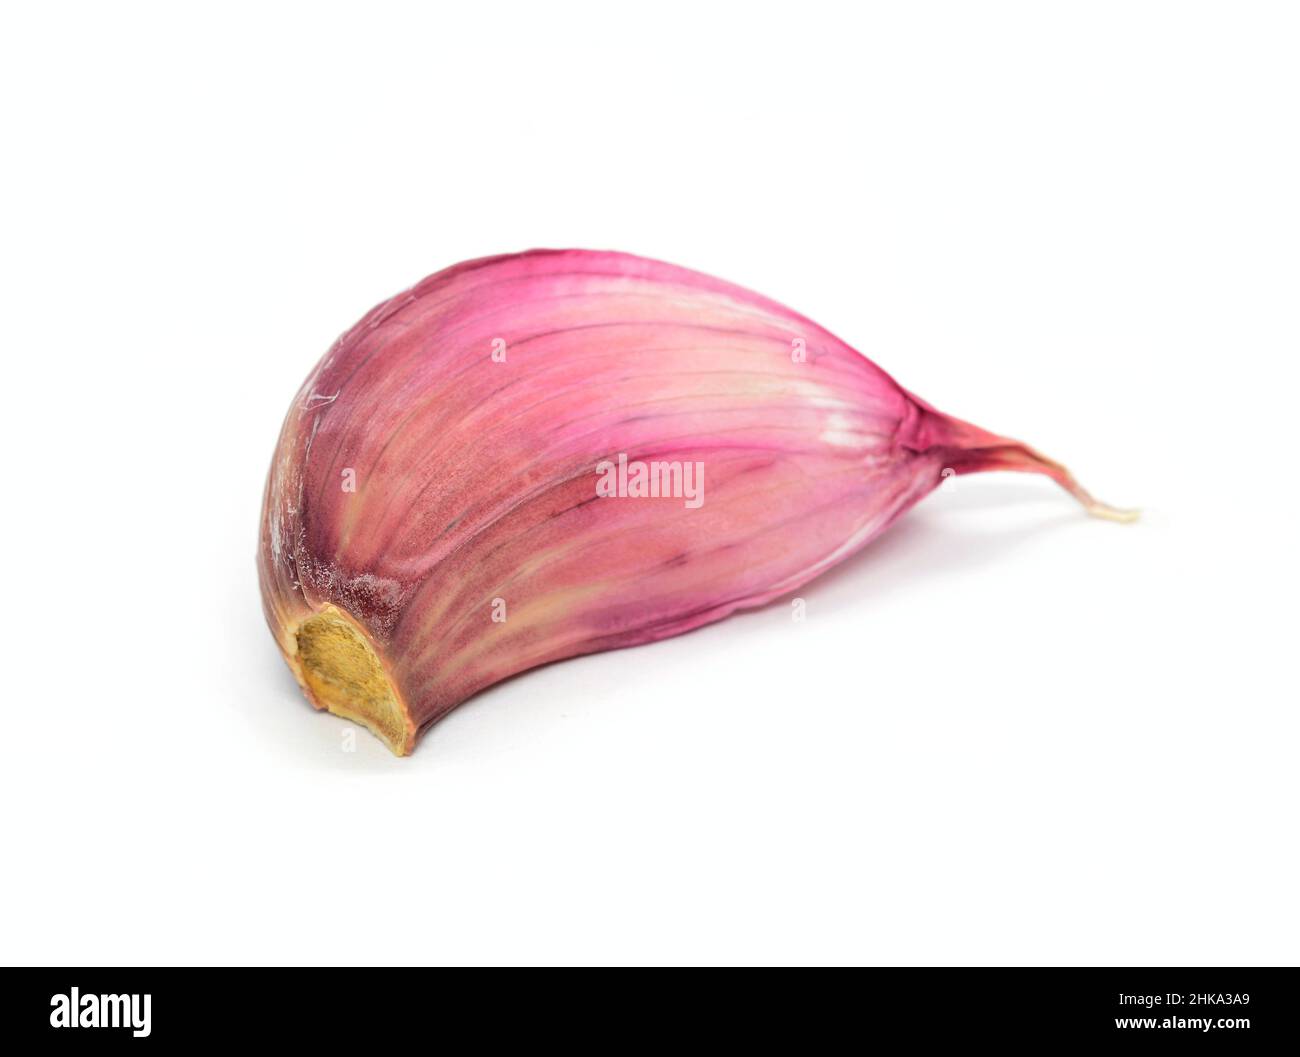 Closeup of a one clove of garlic on white background. Stock Photo